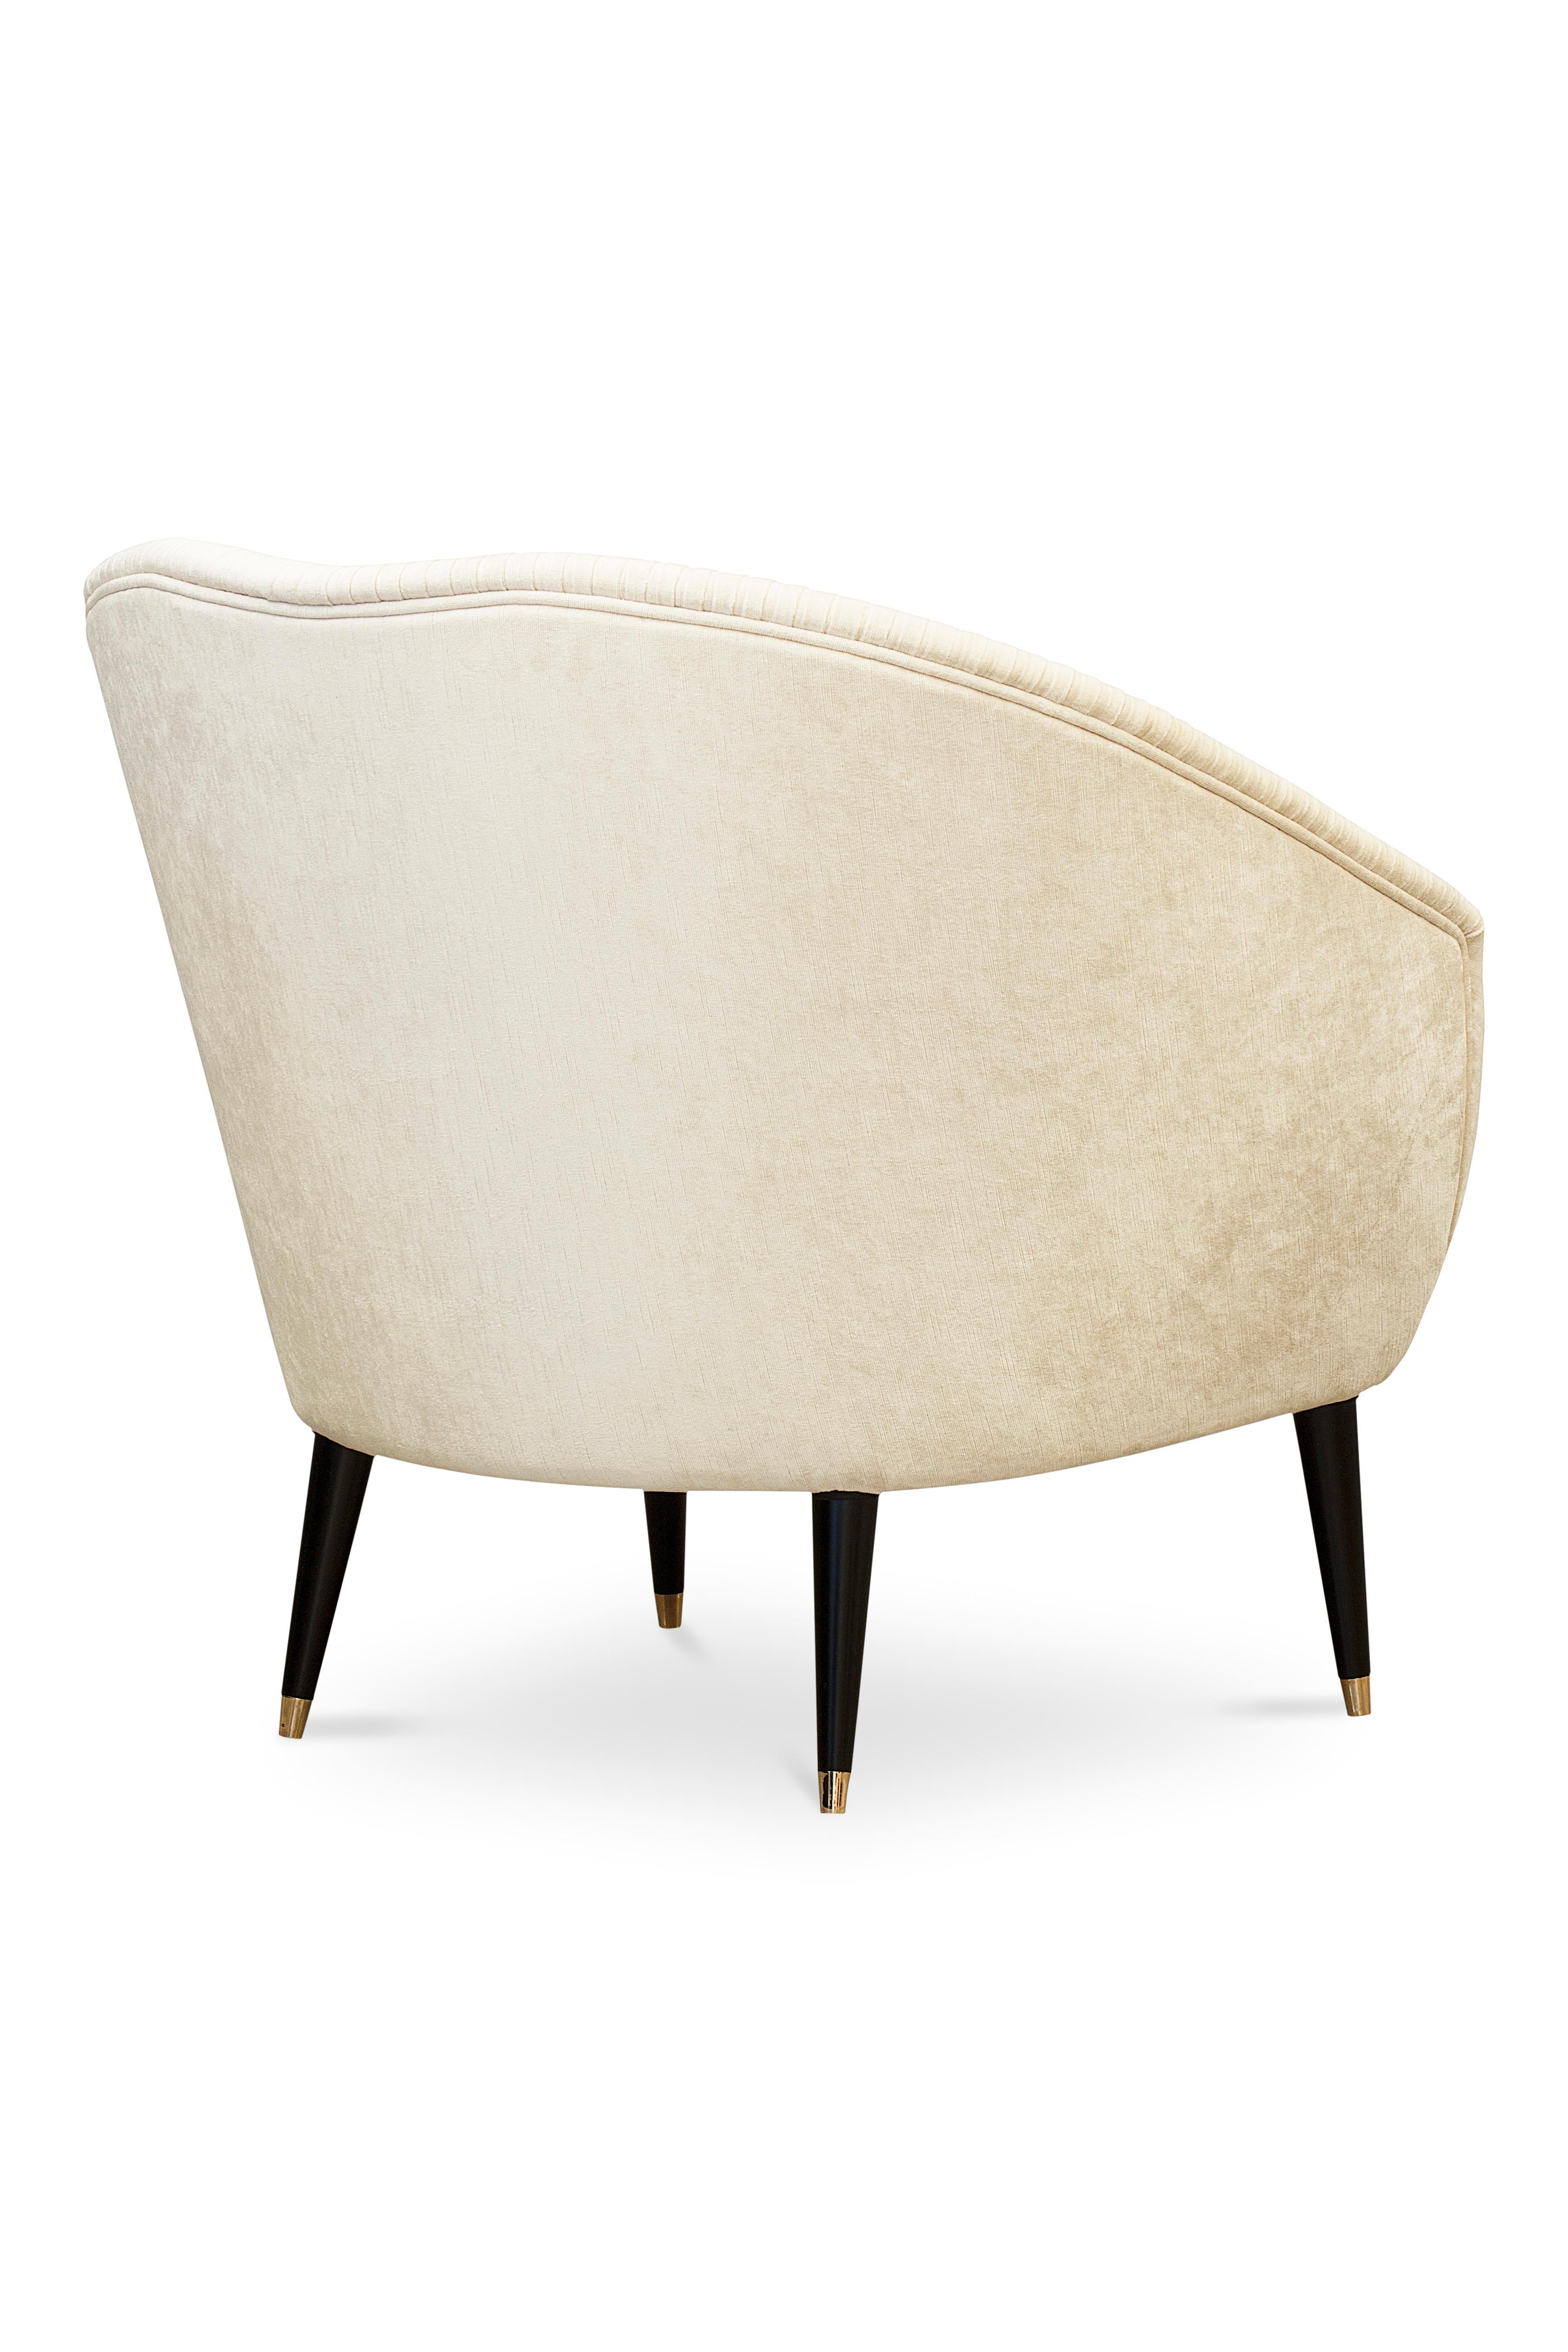 Contemporary Audrey Chair and Foot Rest For Sale